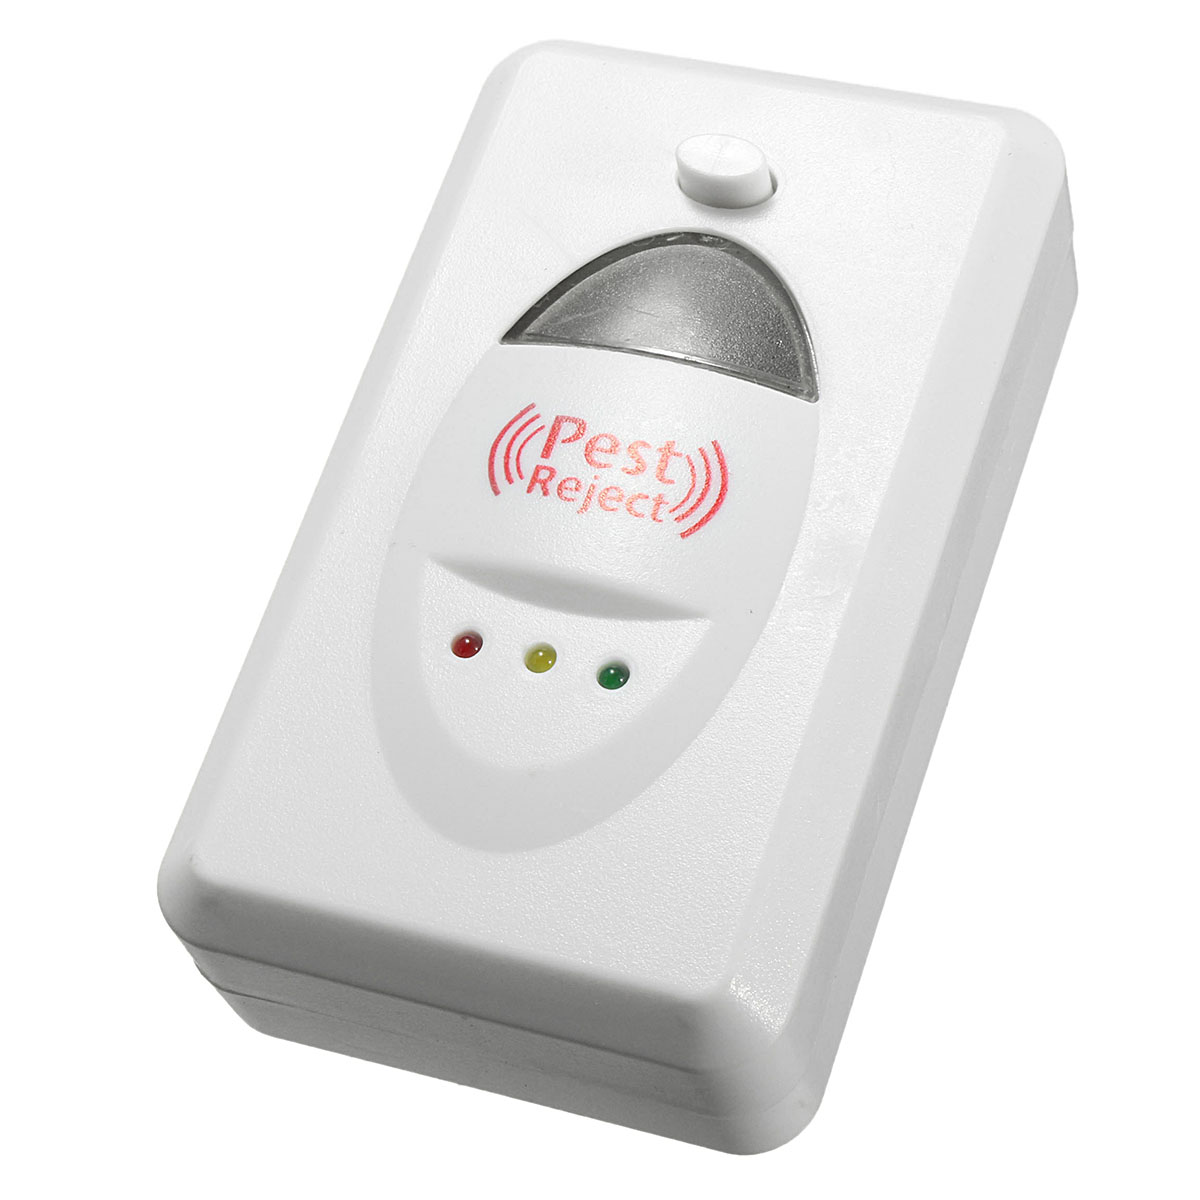 Ultrasonic-Electronic-Pest-Animal-Repeller-Reject-Anti-Mosquito-Bug-Insect-Enhanced-1397436-6